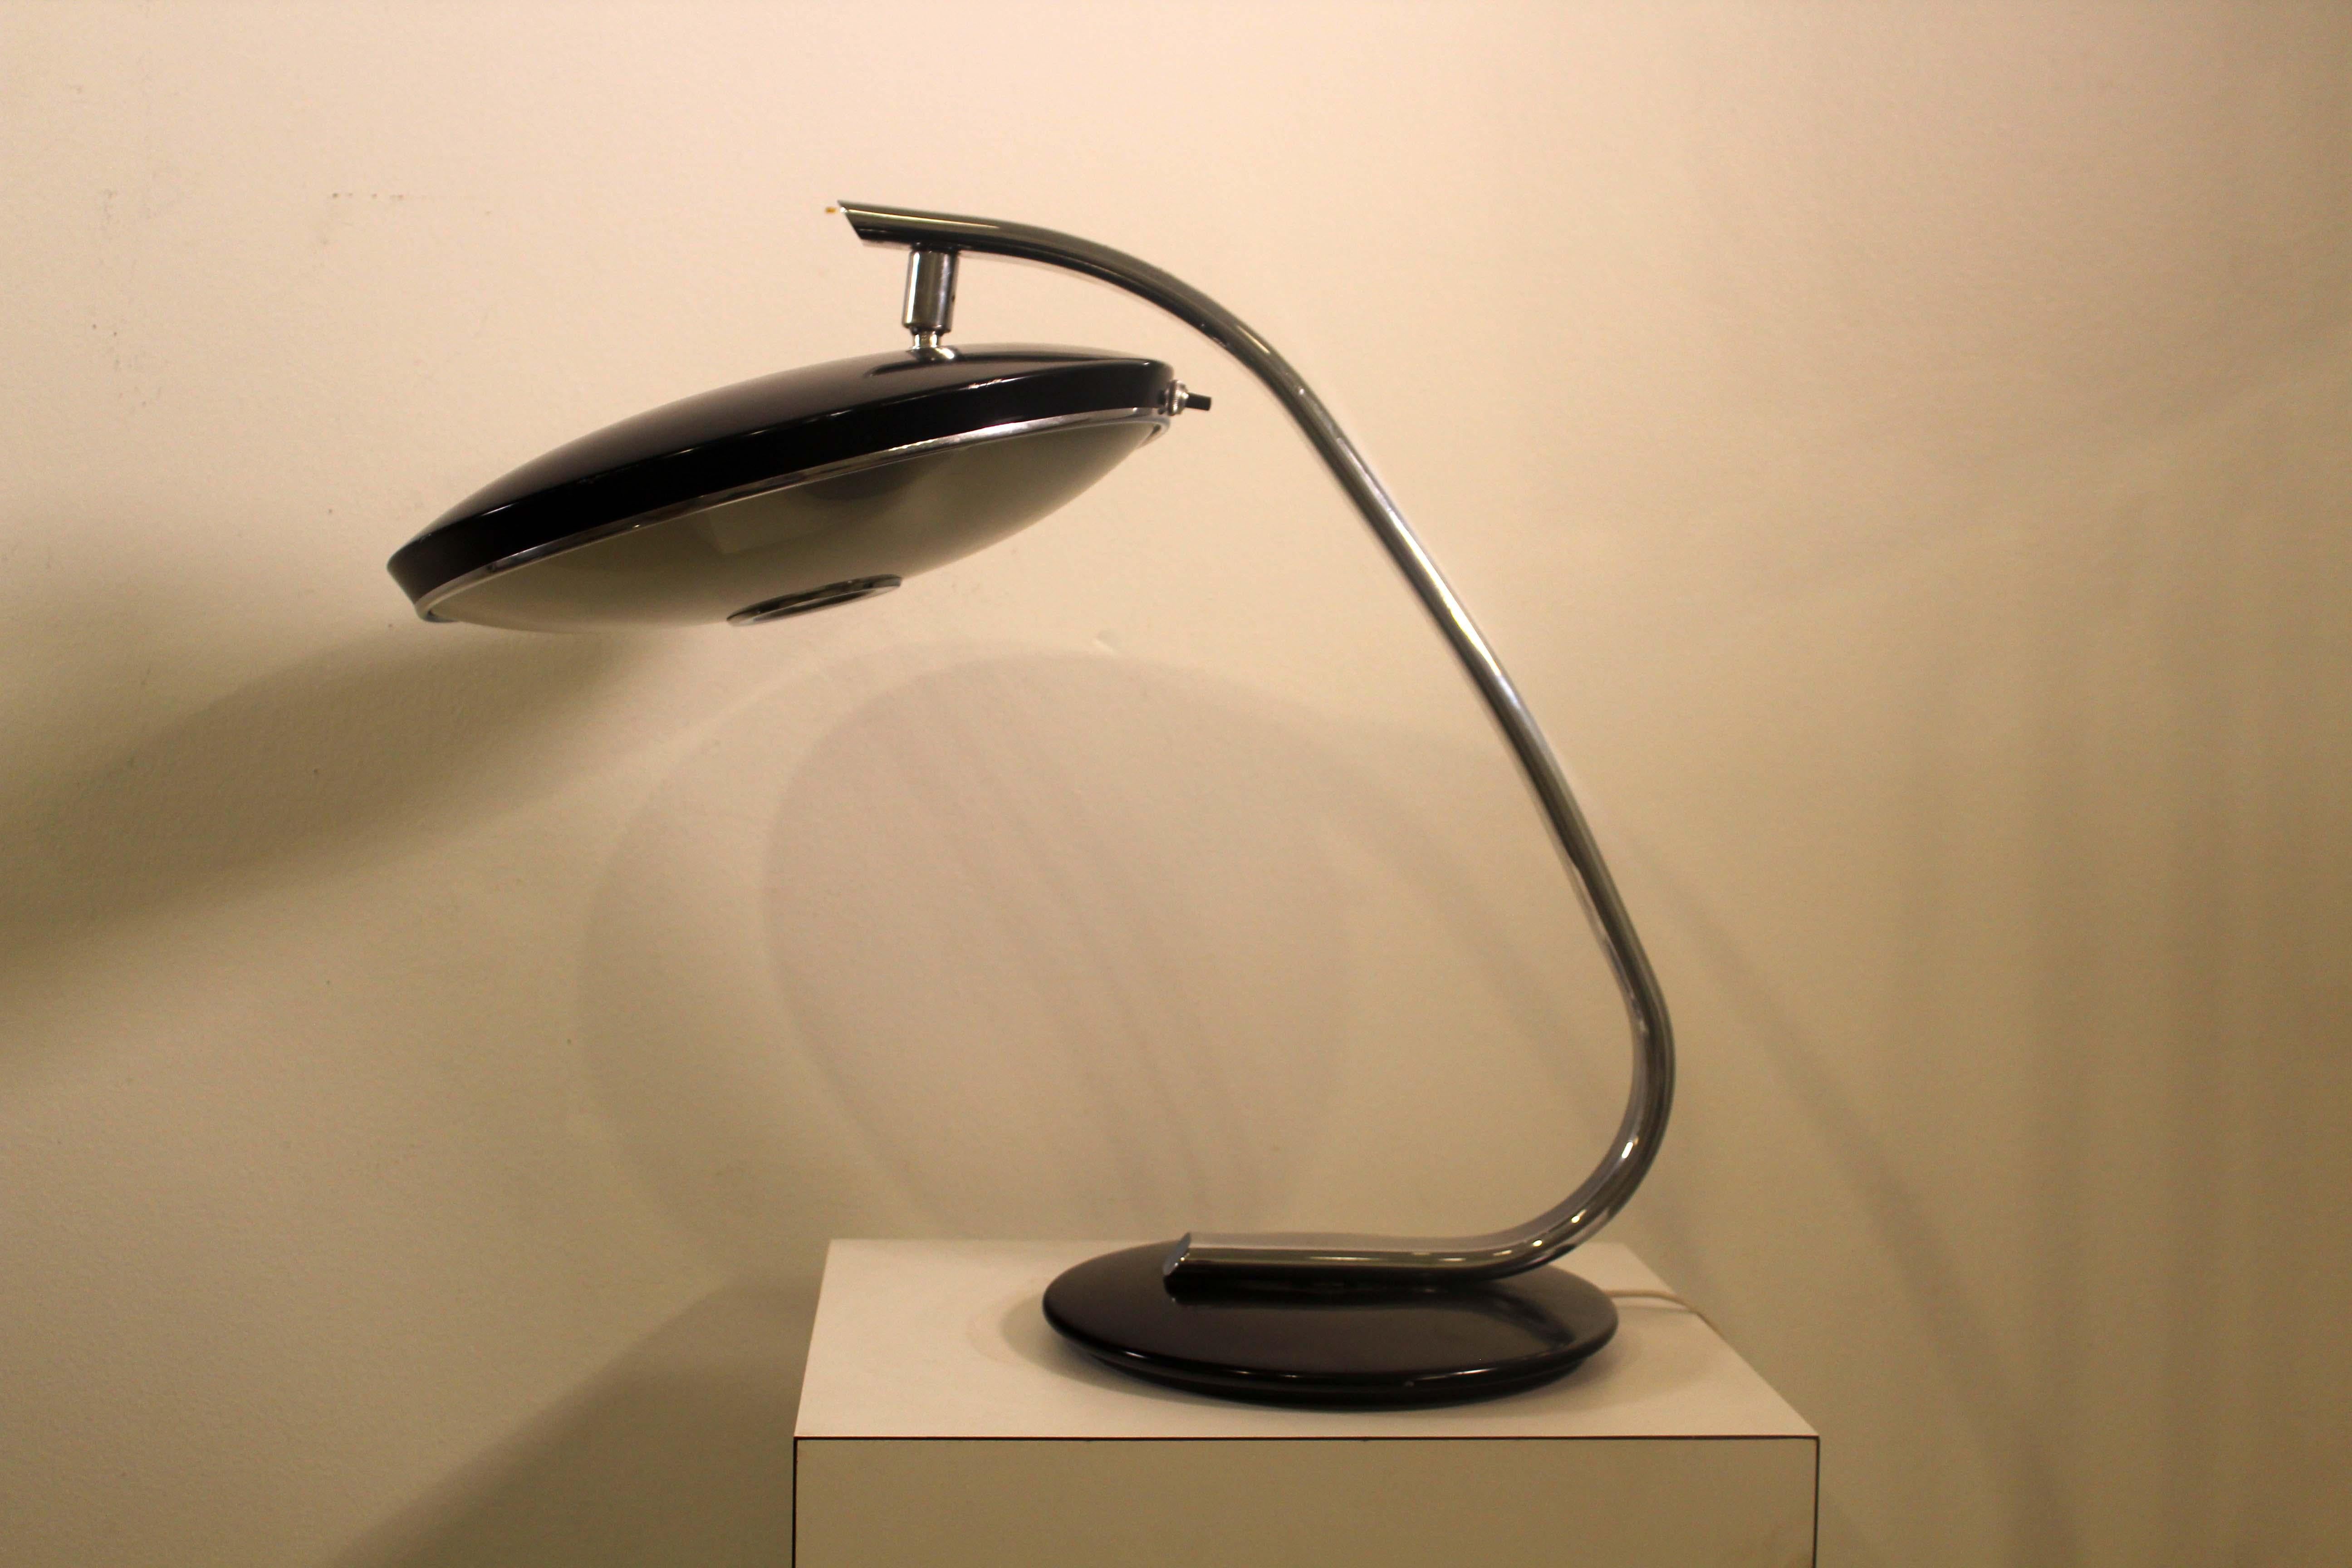 Up for consideration is a sleek, FASE black desk lamp metal and chrome. On switch is a twist of the knob. In very good condition.

Dimensions: 18.5